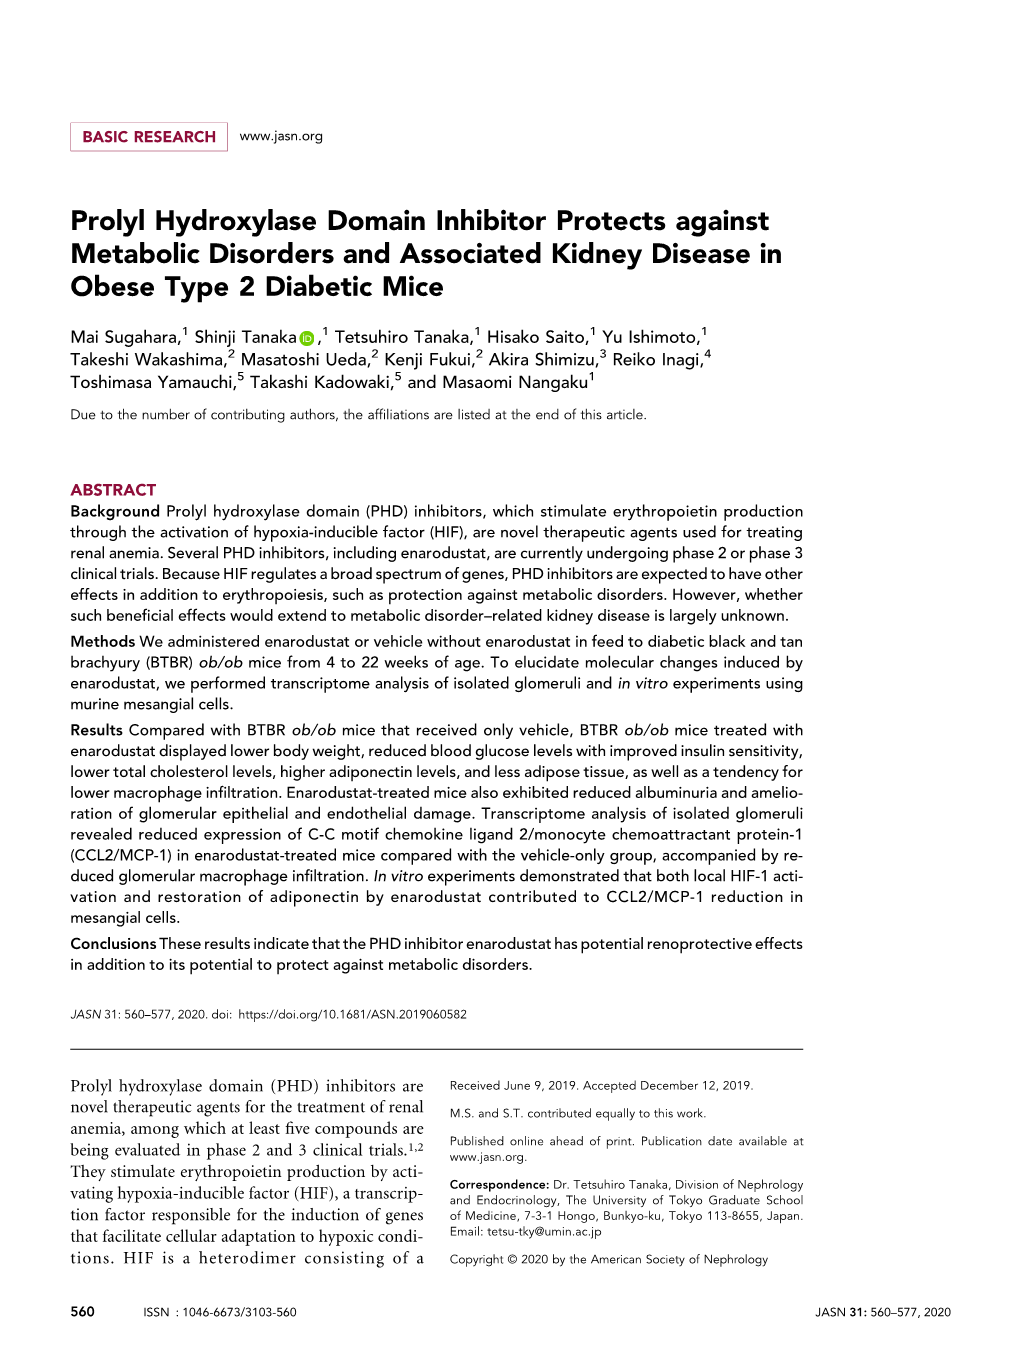 Prolyl Hydroxylase Domain Inhibitor Protects Against Metabolic Disorders and Associated Kidney Disease in Obese Type 2 Diabetic Mice